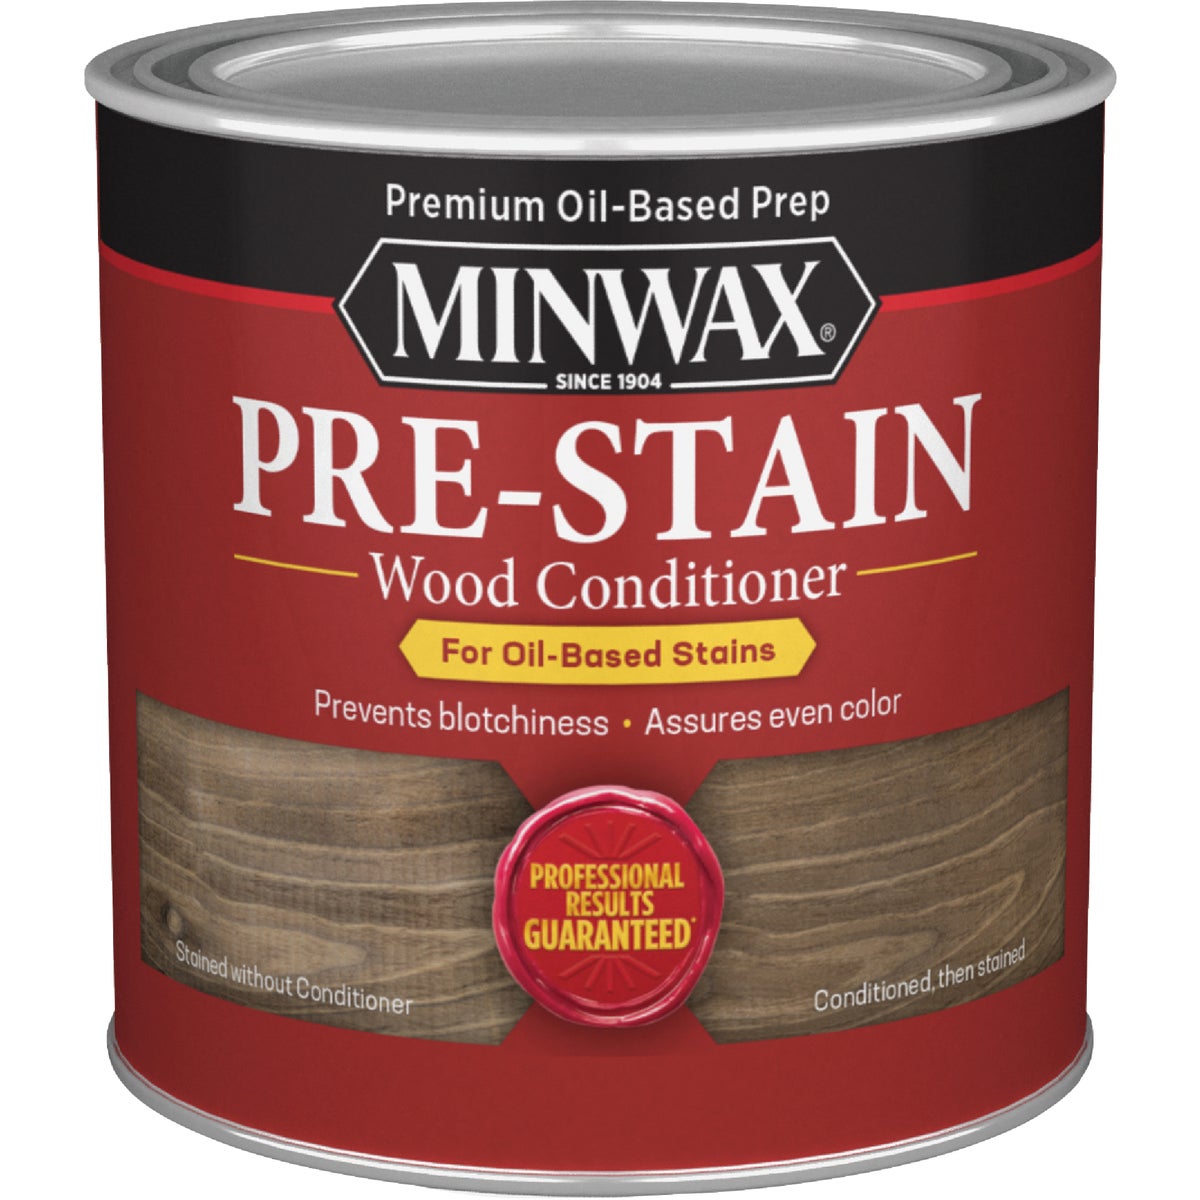 Item 788902, A Pre-Stain conditioner for use on soft woods such as pine, fir, and spruce